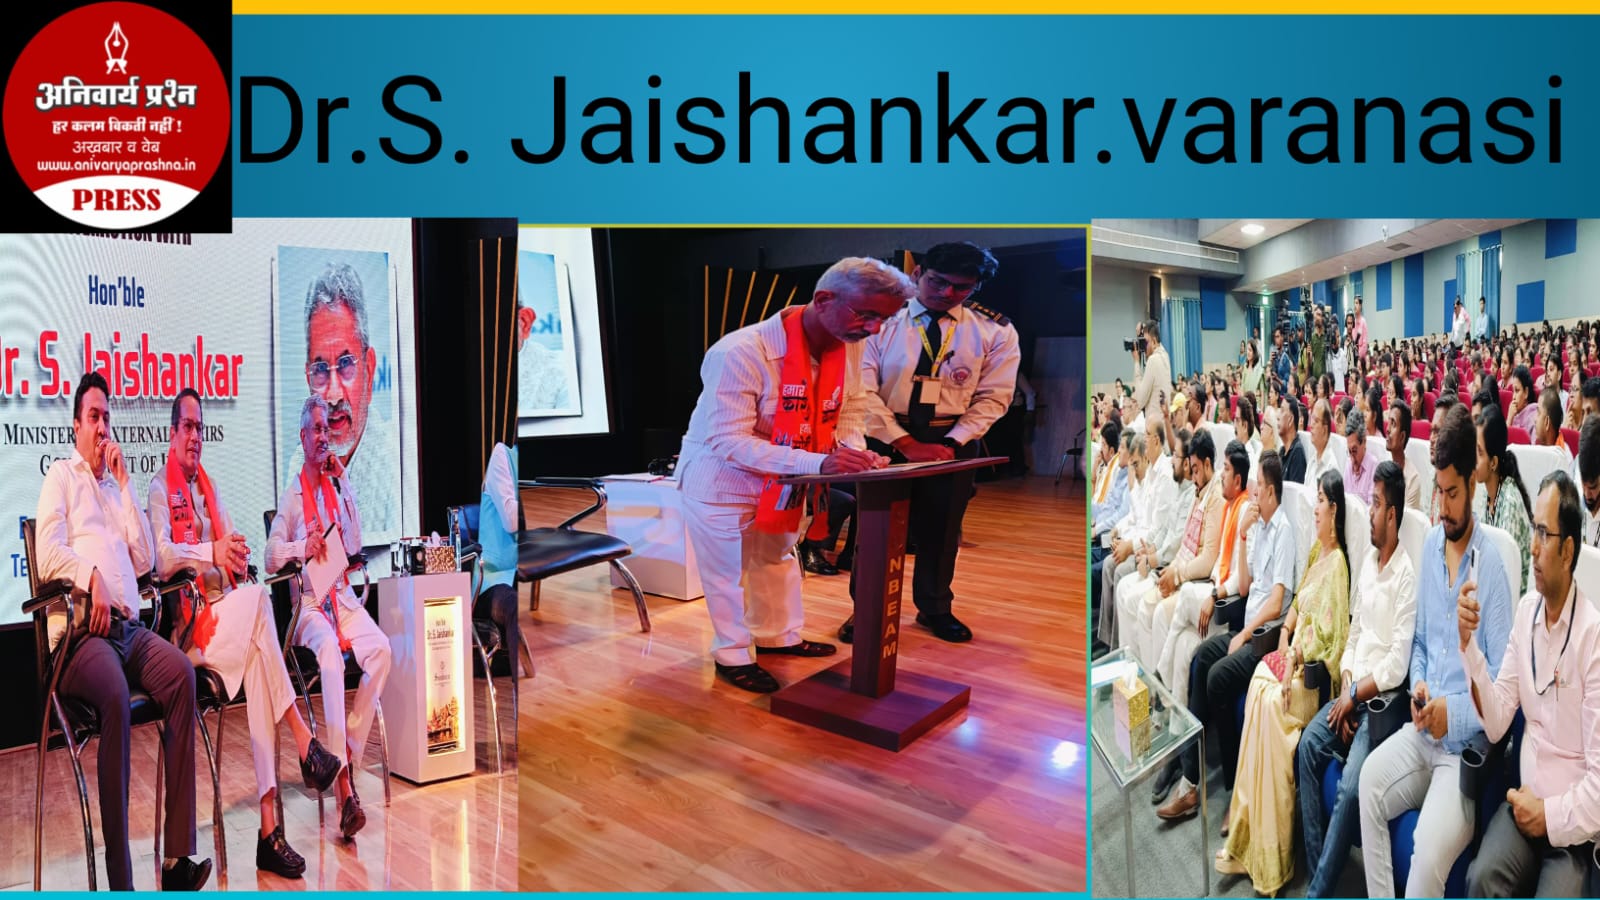 S. Jaishankar said that we all know that our civilizational center is Kashi: